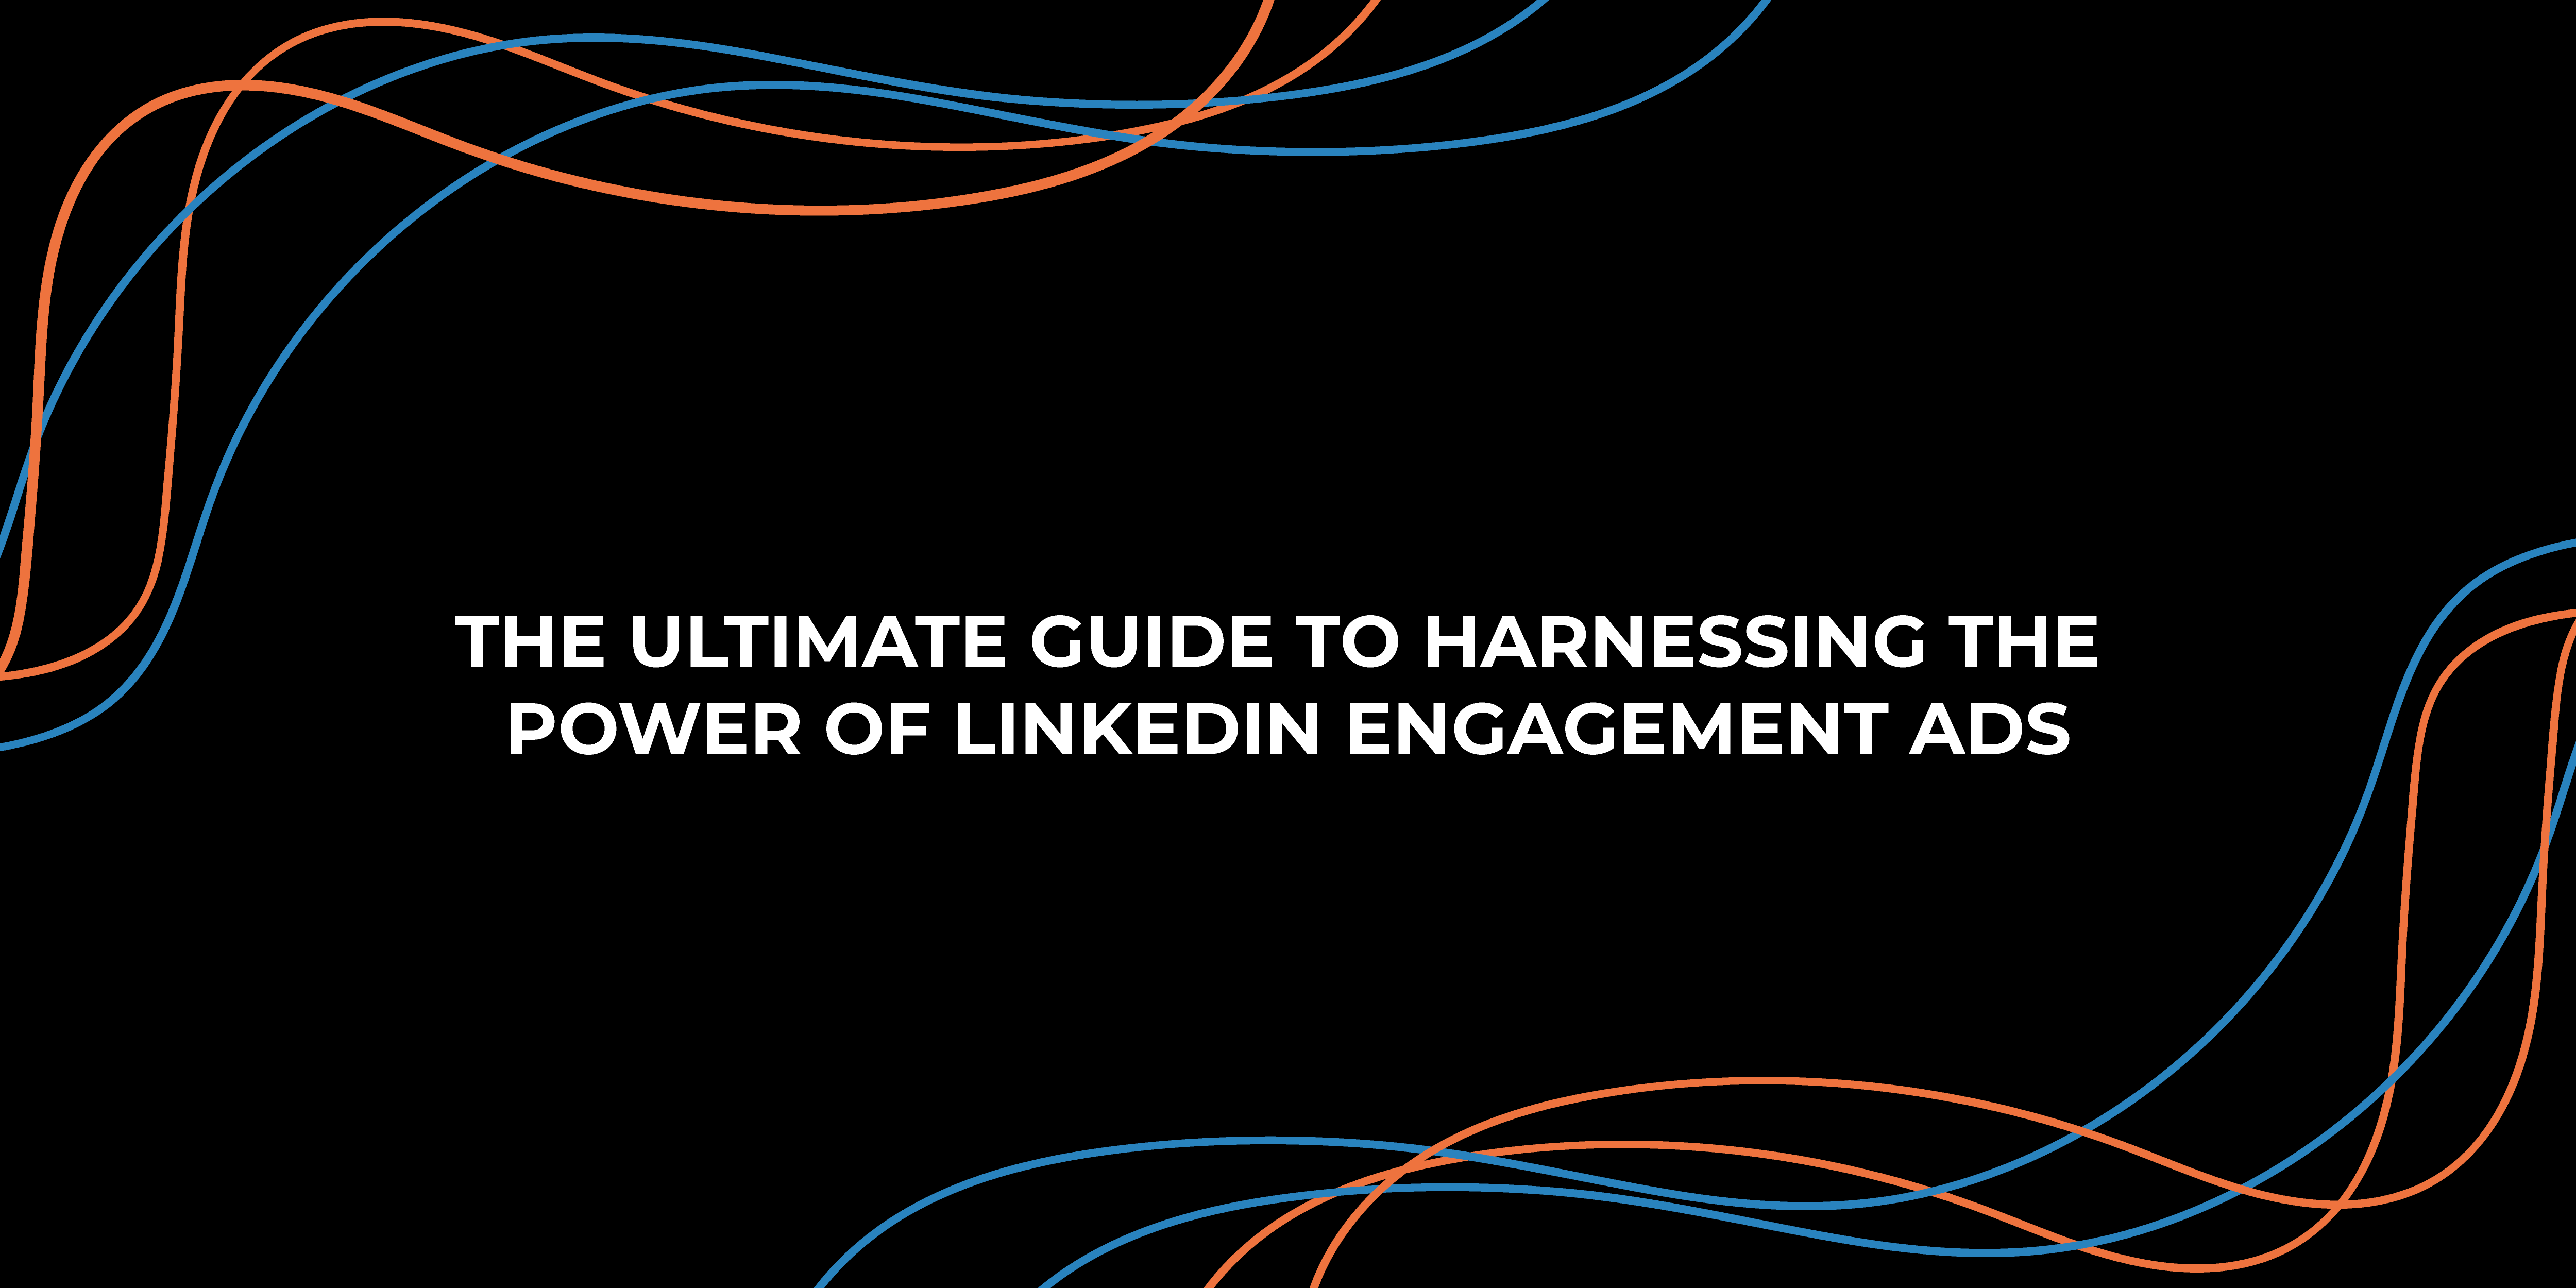 The Ultimate Guide to Harnessing the Power of LinkedIn Engagement Ads